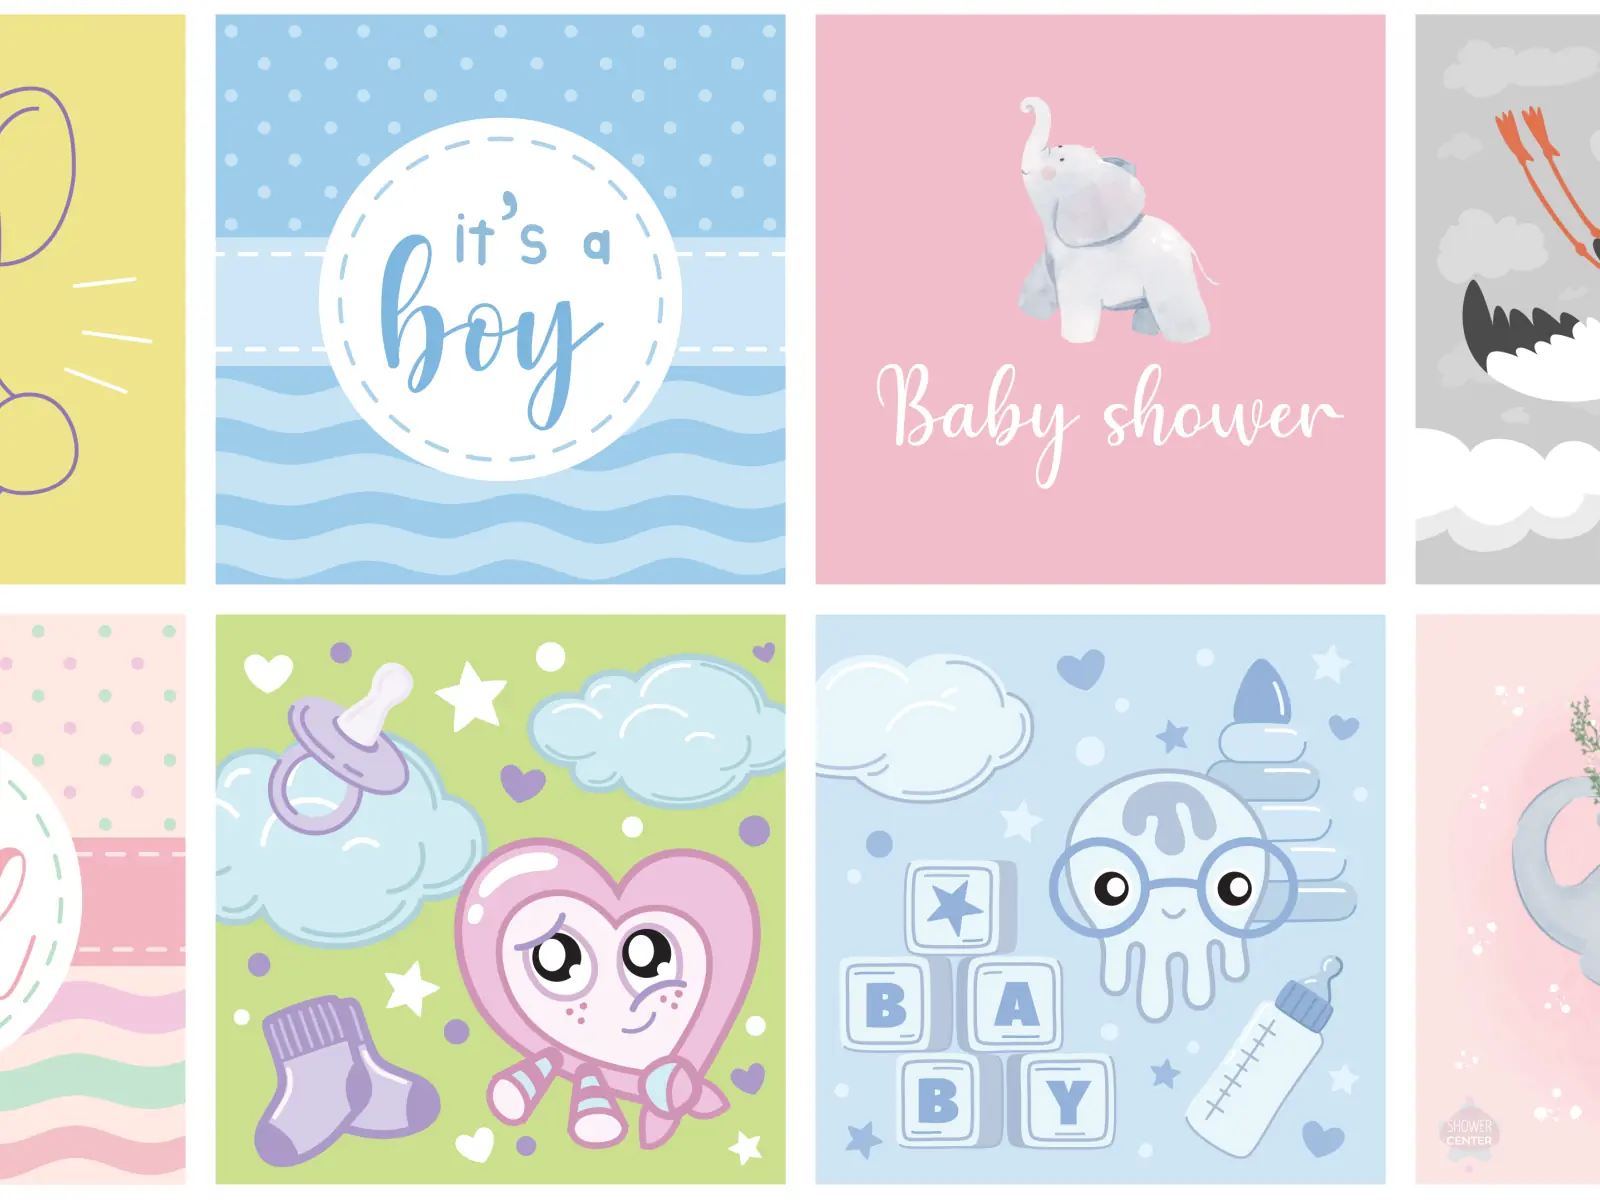 Stylish & Free Baby Shower E-Invites! Create cards with charming designs. Easily customize and send invitations